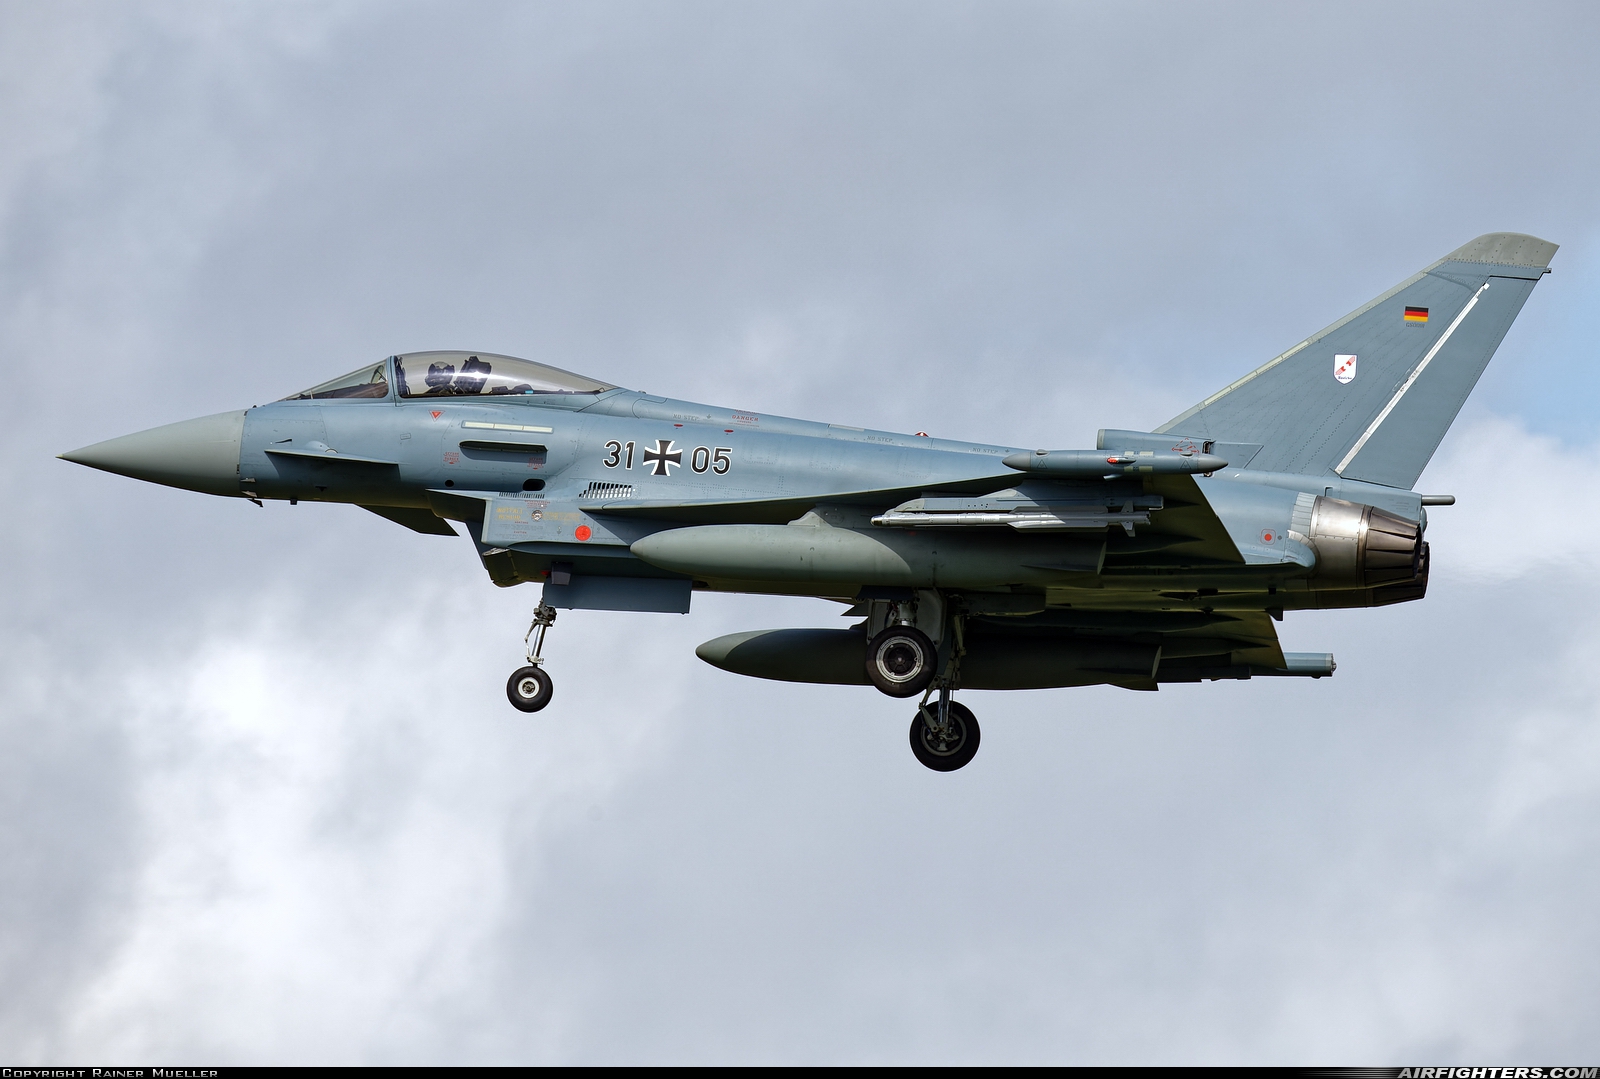 Germany - Air Force Eurofighter EF-2000 Typhoon S 31+05 at Norvenich (ETNN), Germany